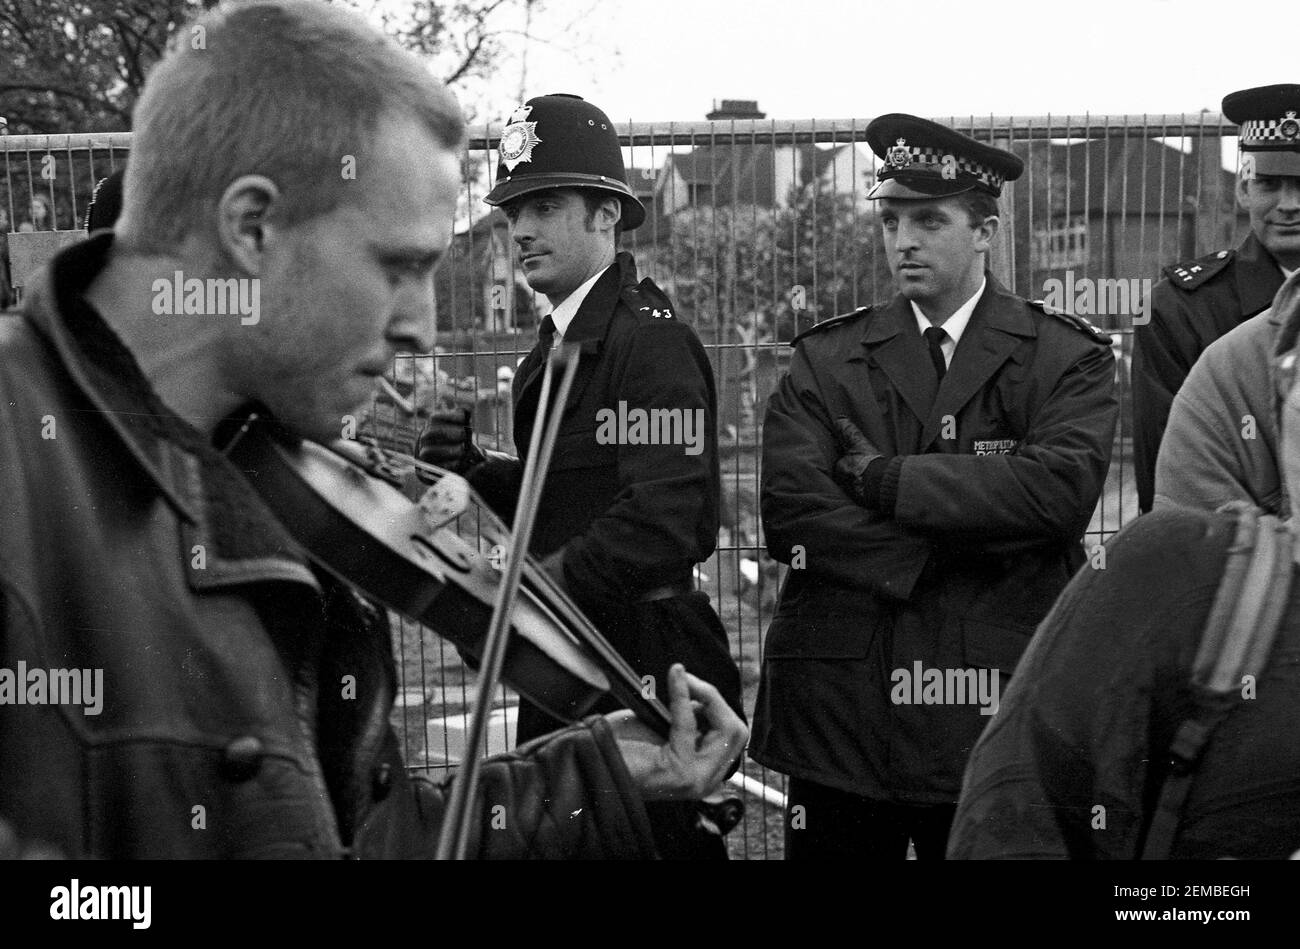 Fiddle players watched by Metropolitan Police officers at an anti roads protest in Wanstead, East London as part of the No M11 Link Road Campaign of direct action against the M11 Link Road road construction in 1994 Stock Photo